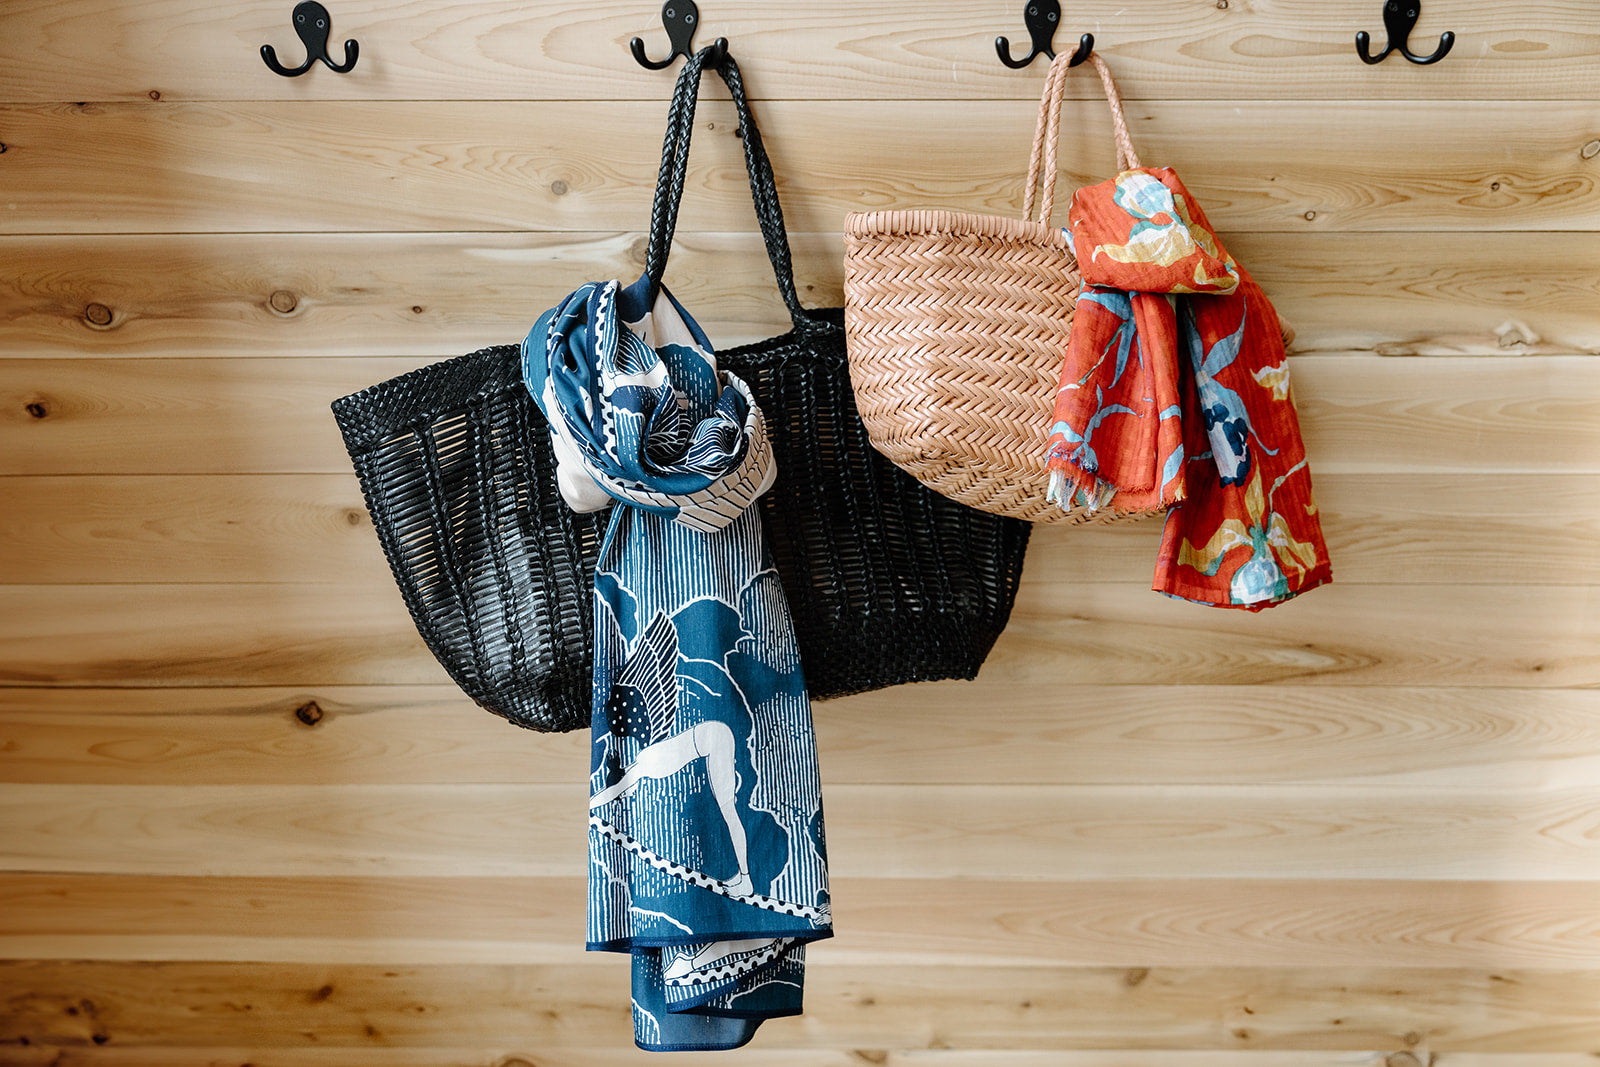 Beach bags and a scarf hanging on hooks against a wooden wall.